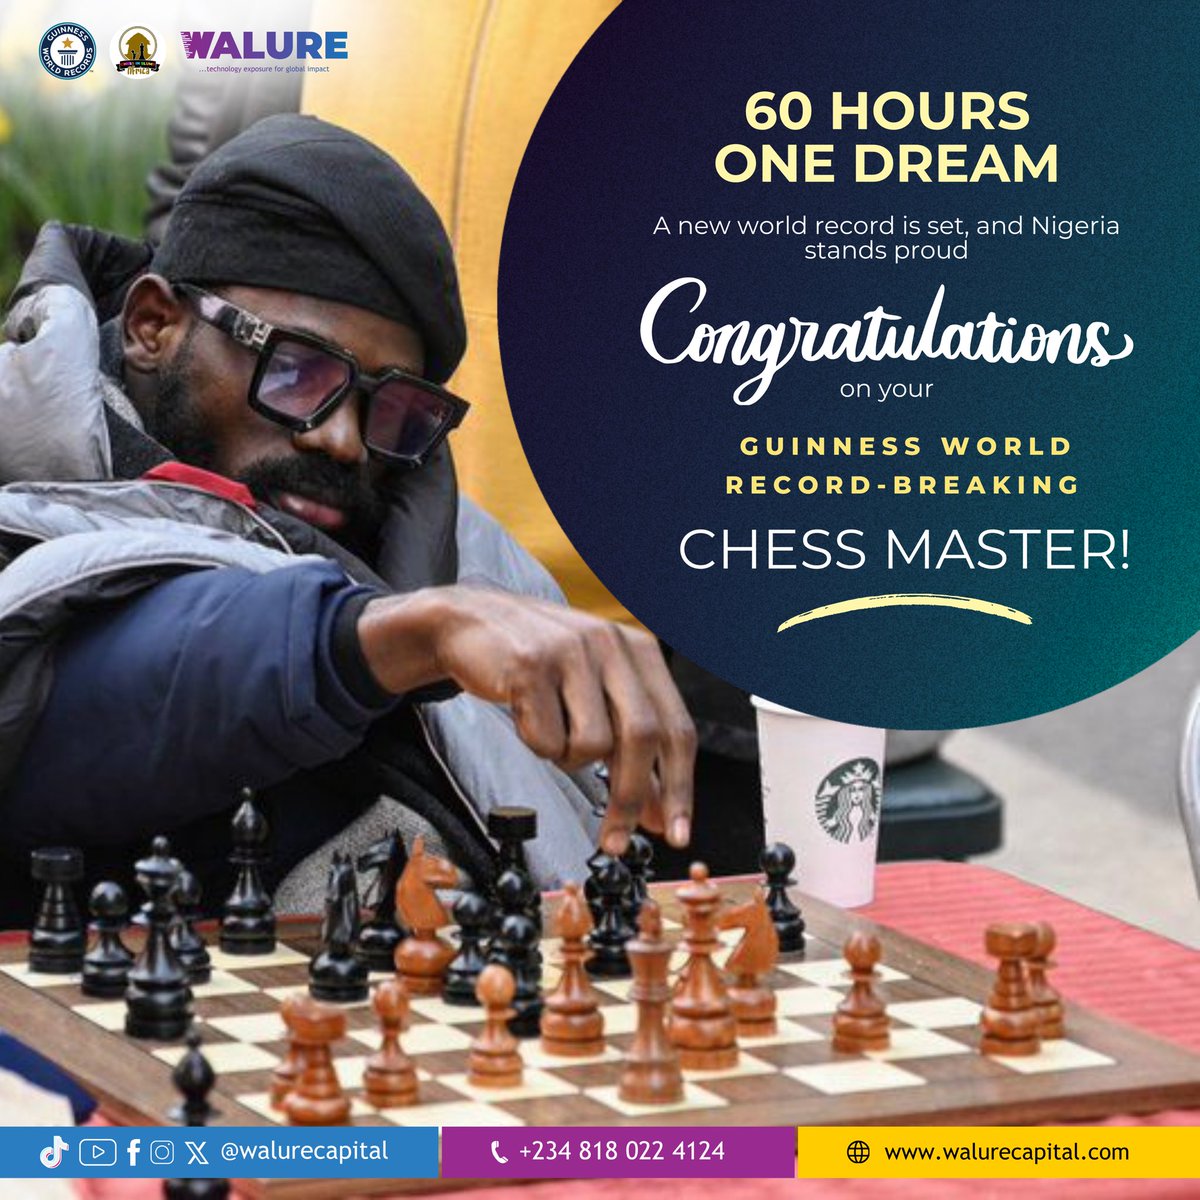 60 hours of chess?! That's some serious dedication and mental stamina! Huge congratulations on completing this incredible chess marathon, Tunde. You're an absolute legend!

#chess #ChessInSlum #TundeOnakoya